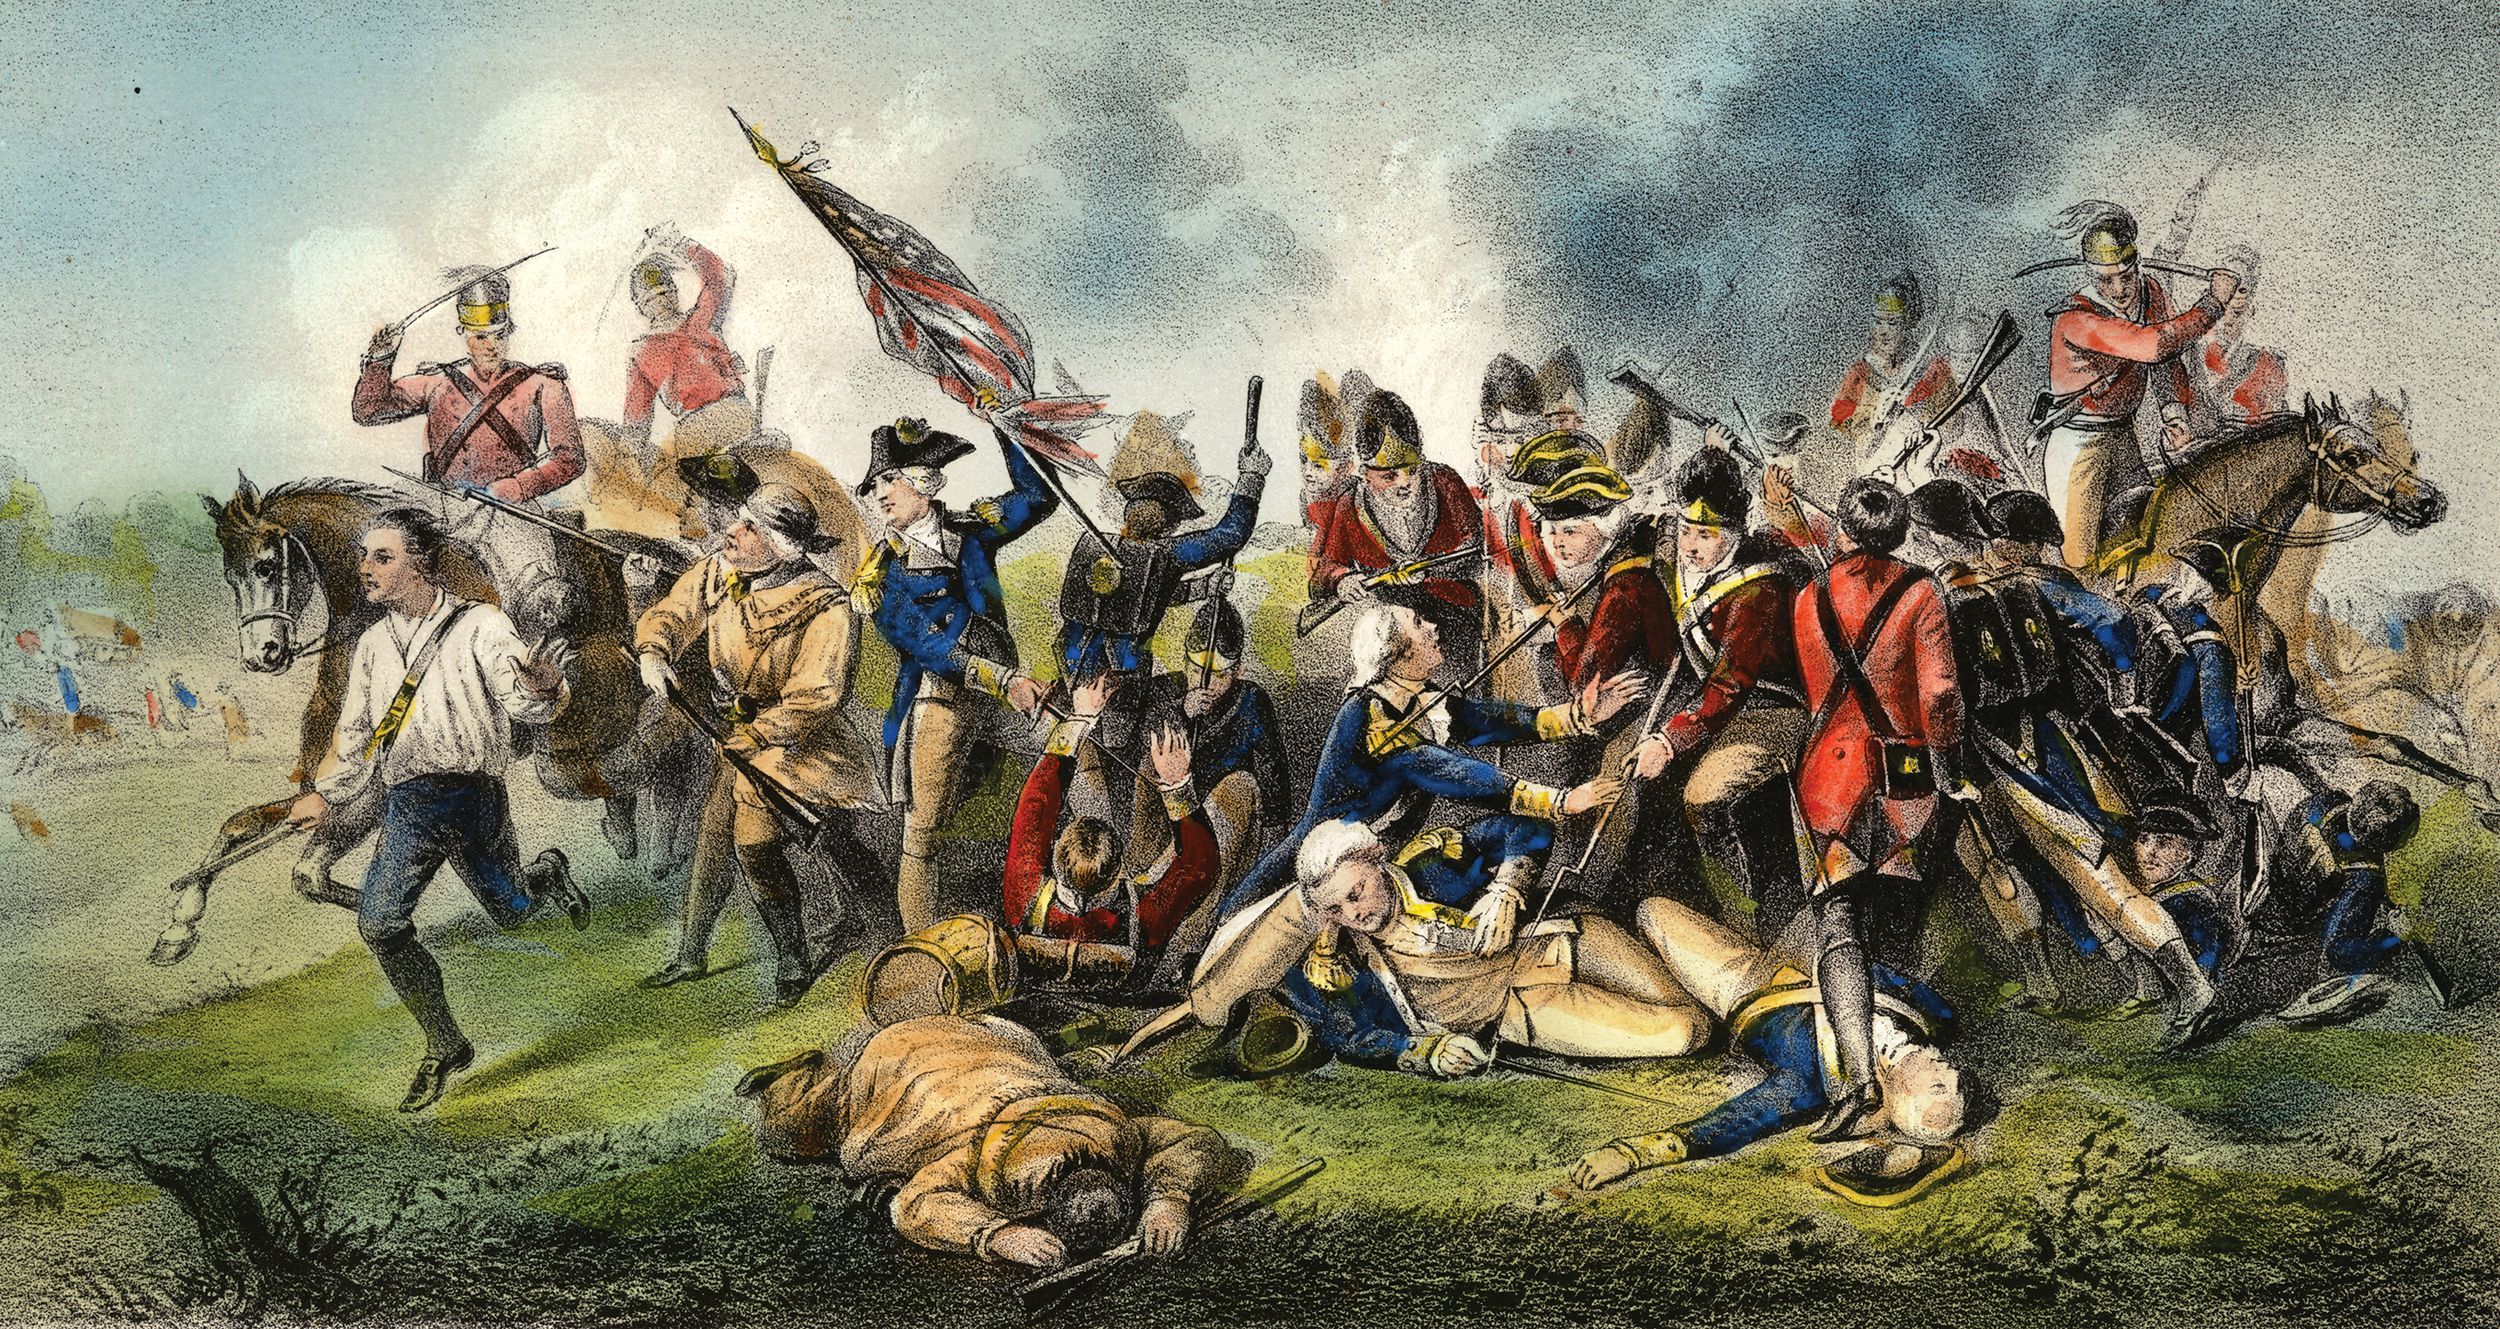 Continentals and local militia under the command of Horatio Gates, were badly defeated by Cornwallis at the Battle of Camden in South Carolina.